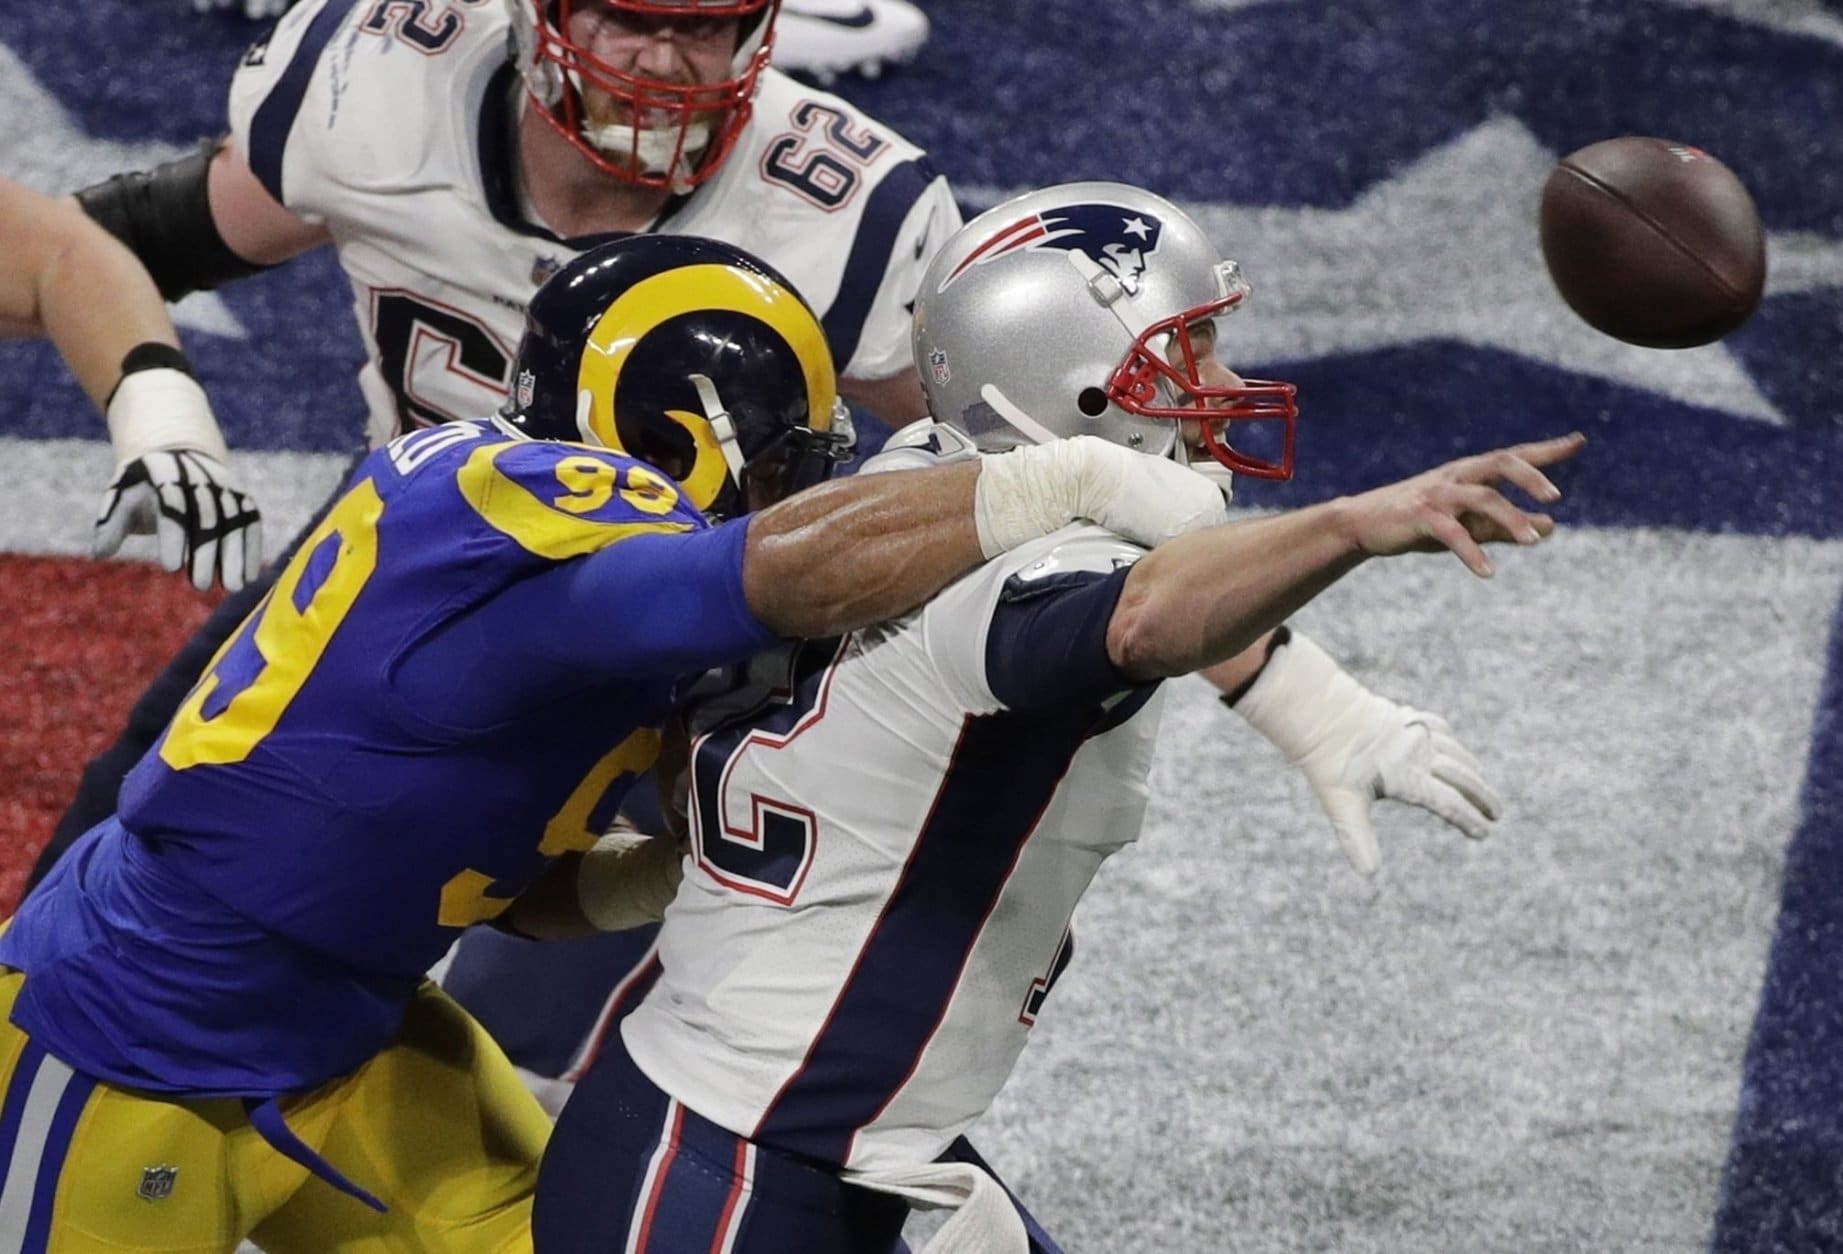 Los Angeles Rams' Aaron Donald (99) hits New England Patriots' Tom Brady (12) during the first half of the NFL Super Bowl 53 football game Sunday, Feb. 3, 2019, in Atlanta. (AP Photo/Charlie Riedel)